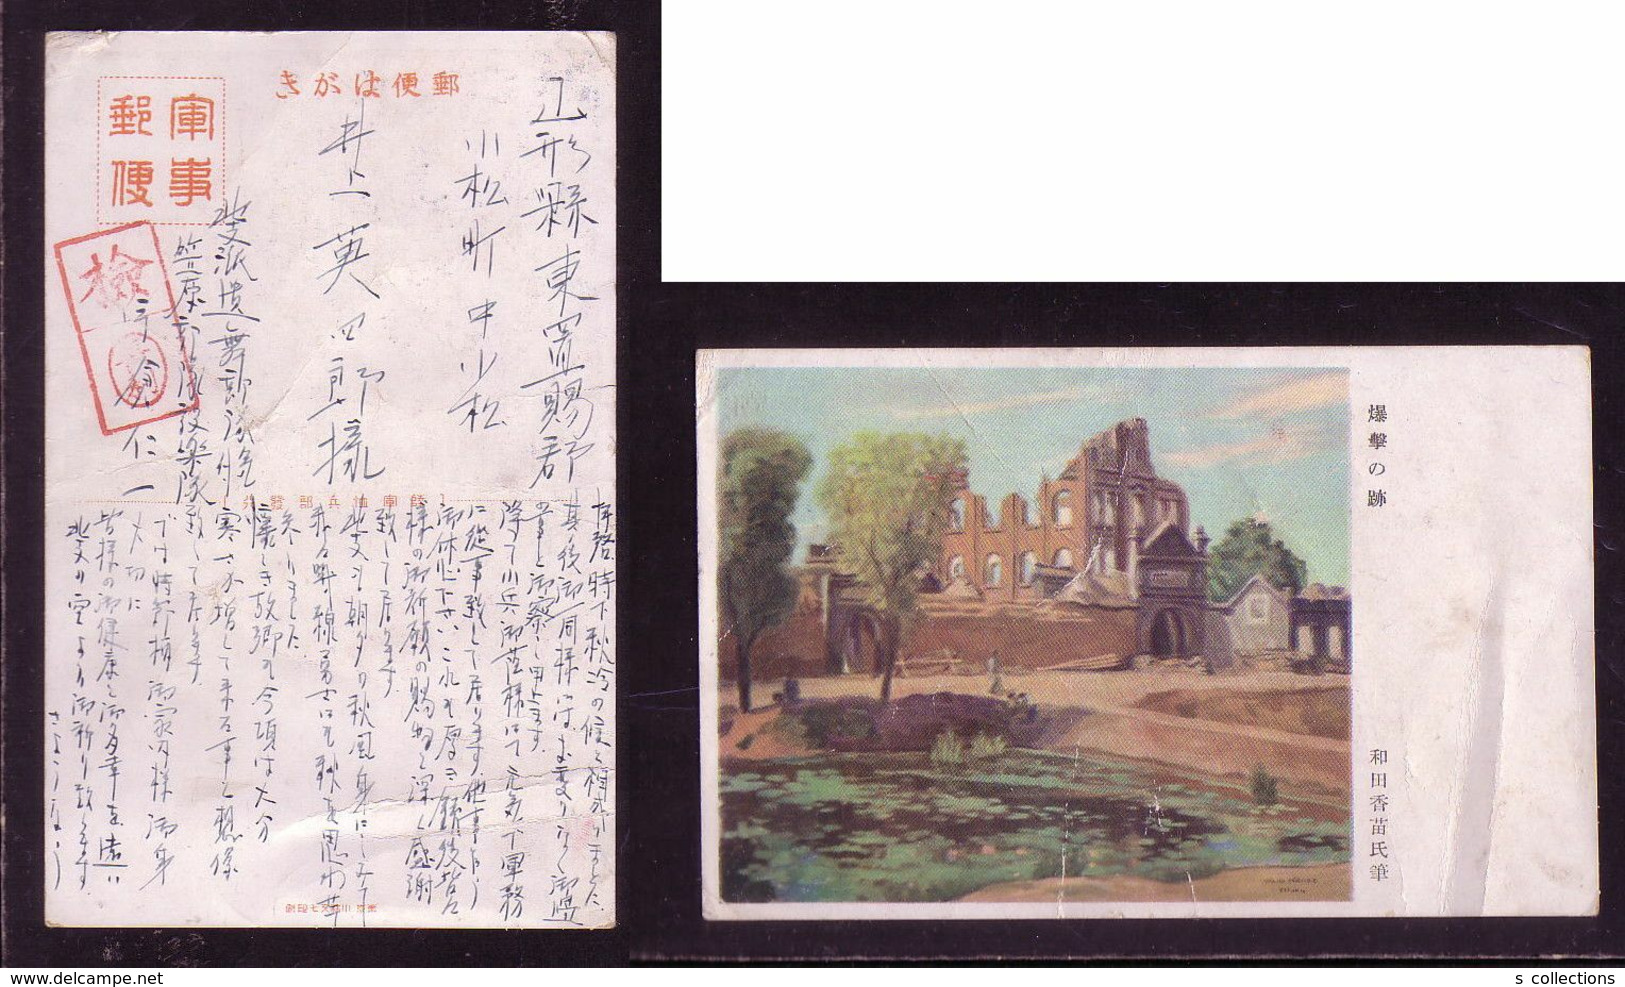 JAPAN WWII Military Bombing Picture Postcard North China WW2 MANCHURIA CHINE MANDCHOUKOUO JAPON GIAPPONE - 1941-45 Northern China